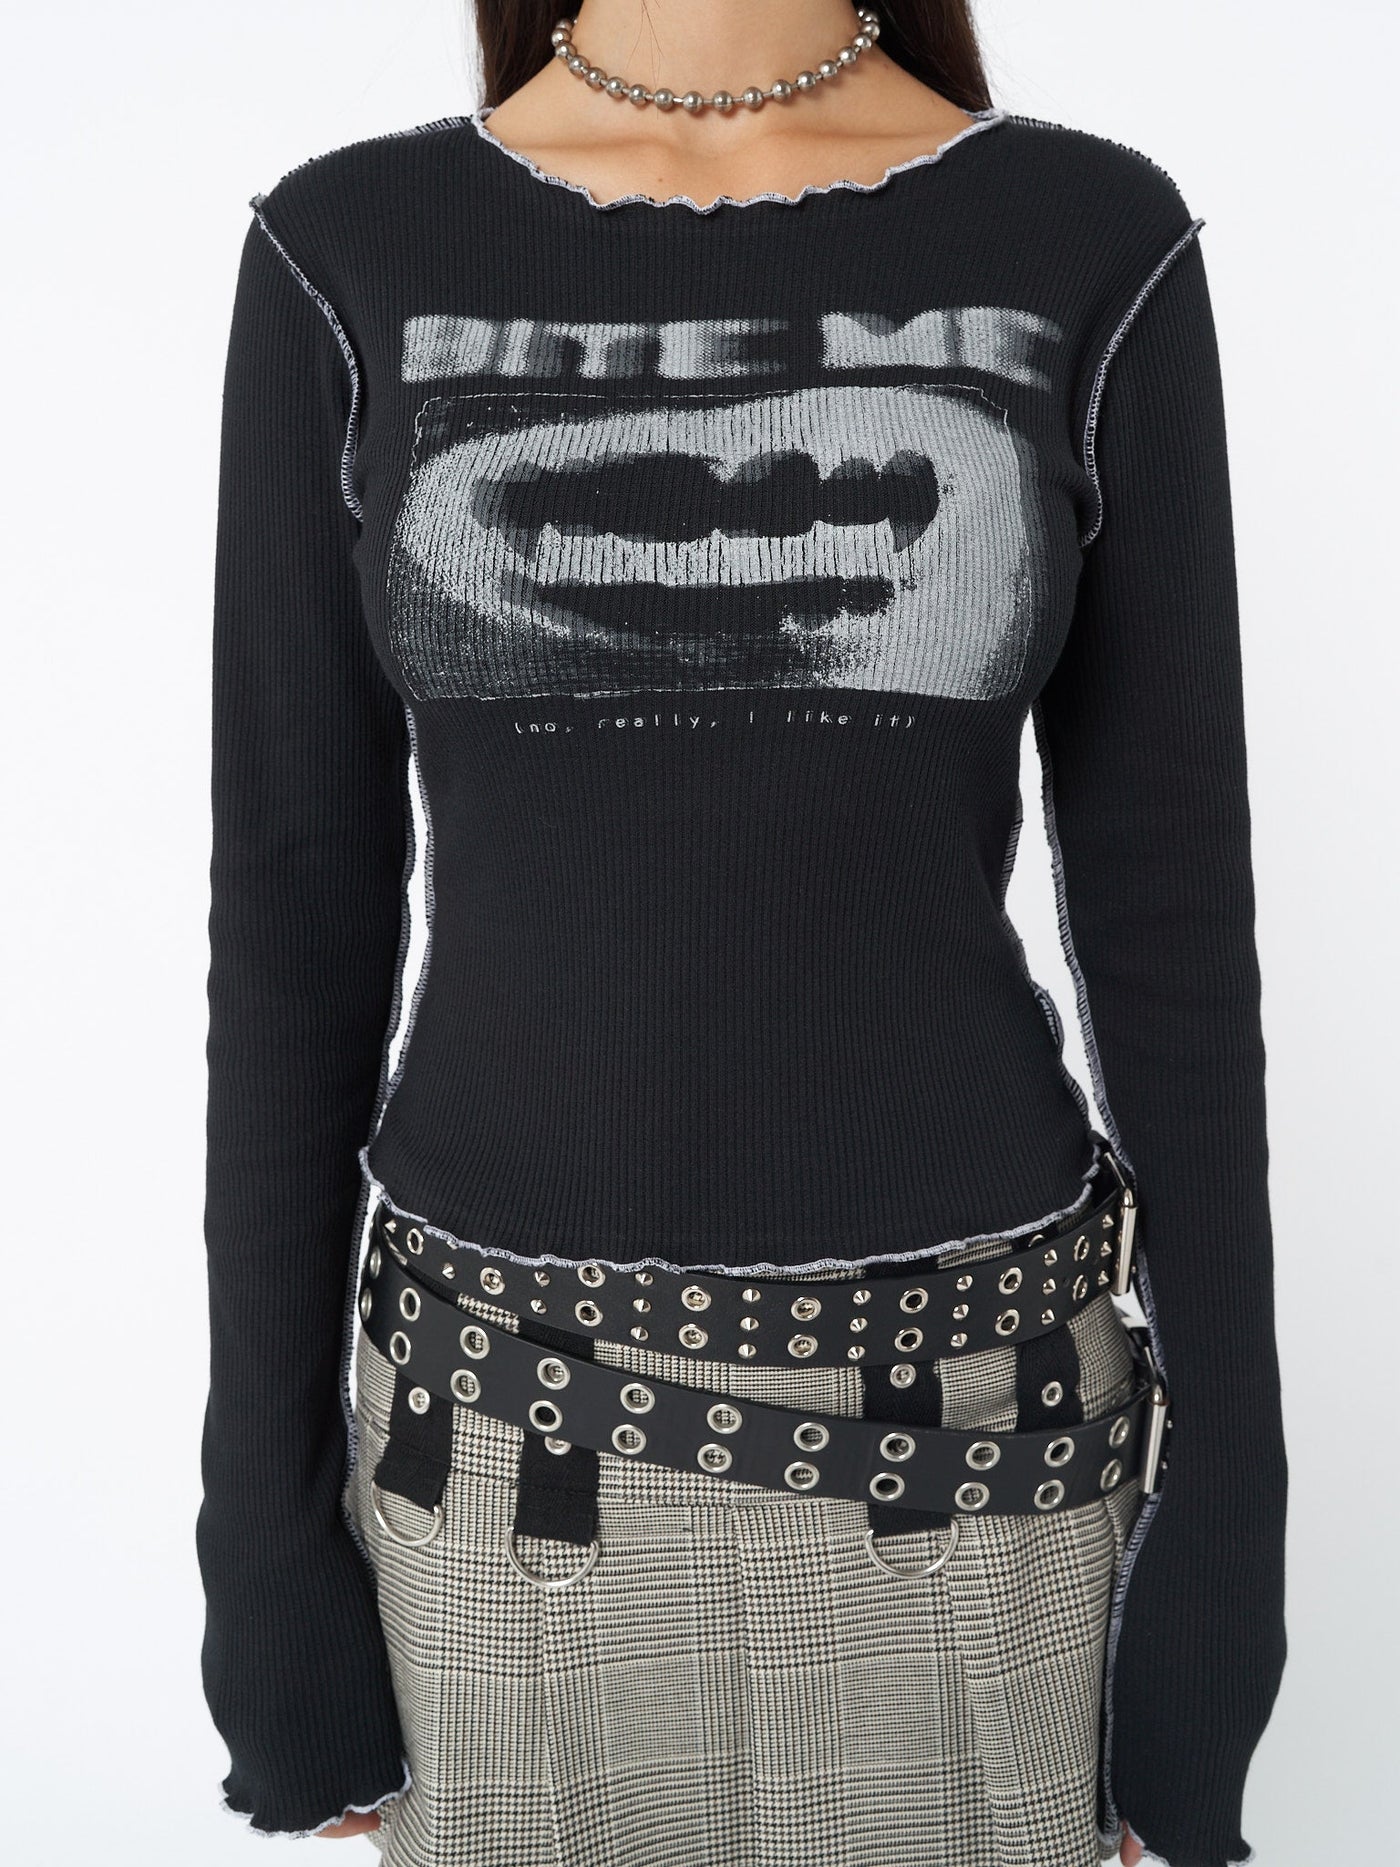 Rib crop top in black with Bite Me graphic screen print and contrast stitching in white